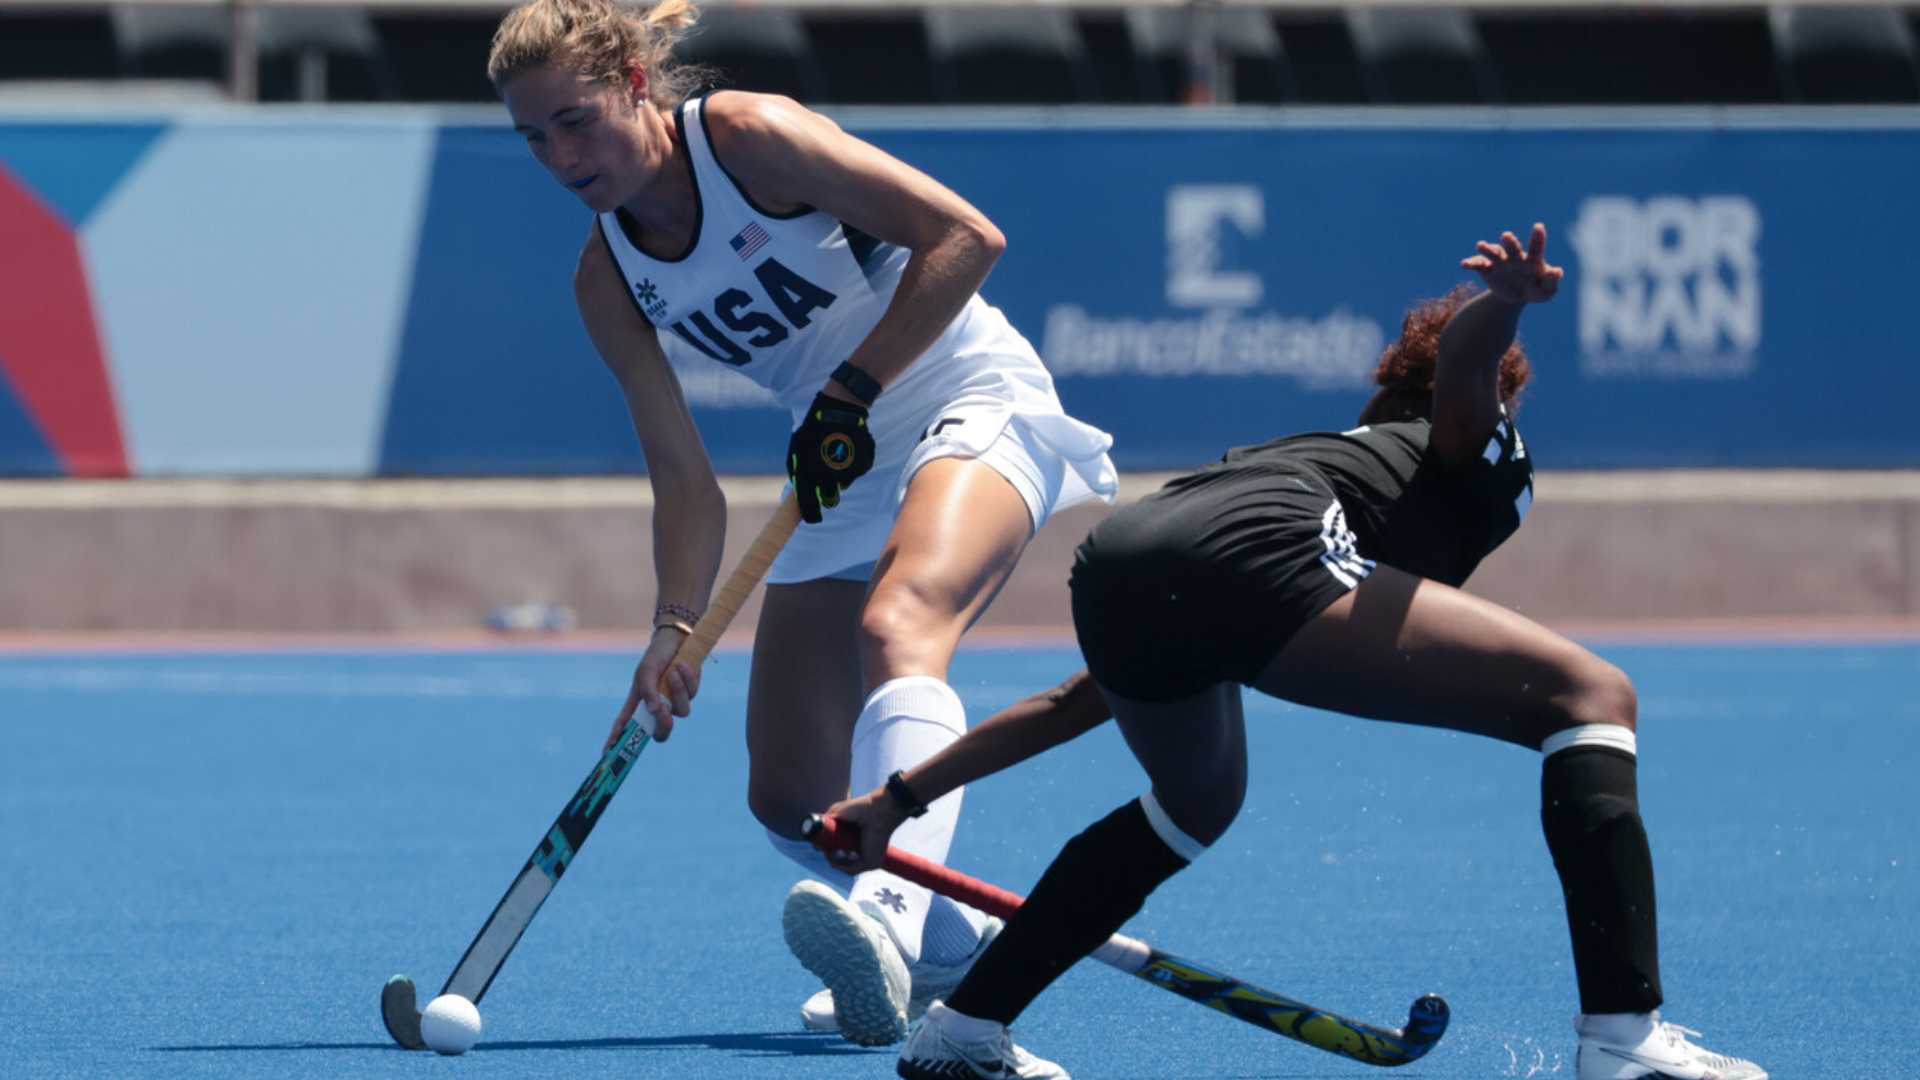 United States debuts with a resounding victory in female's field hockey